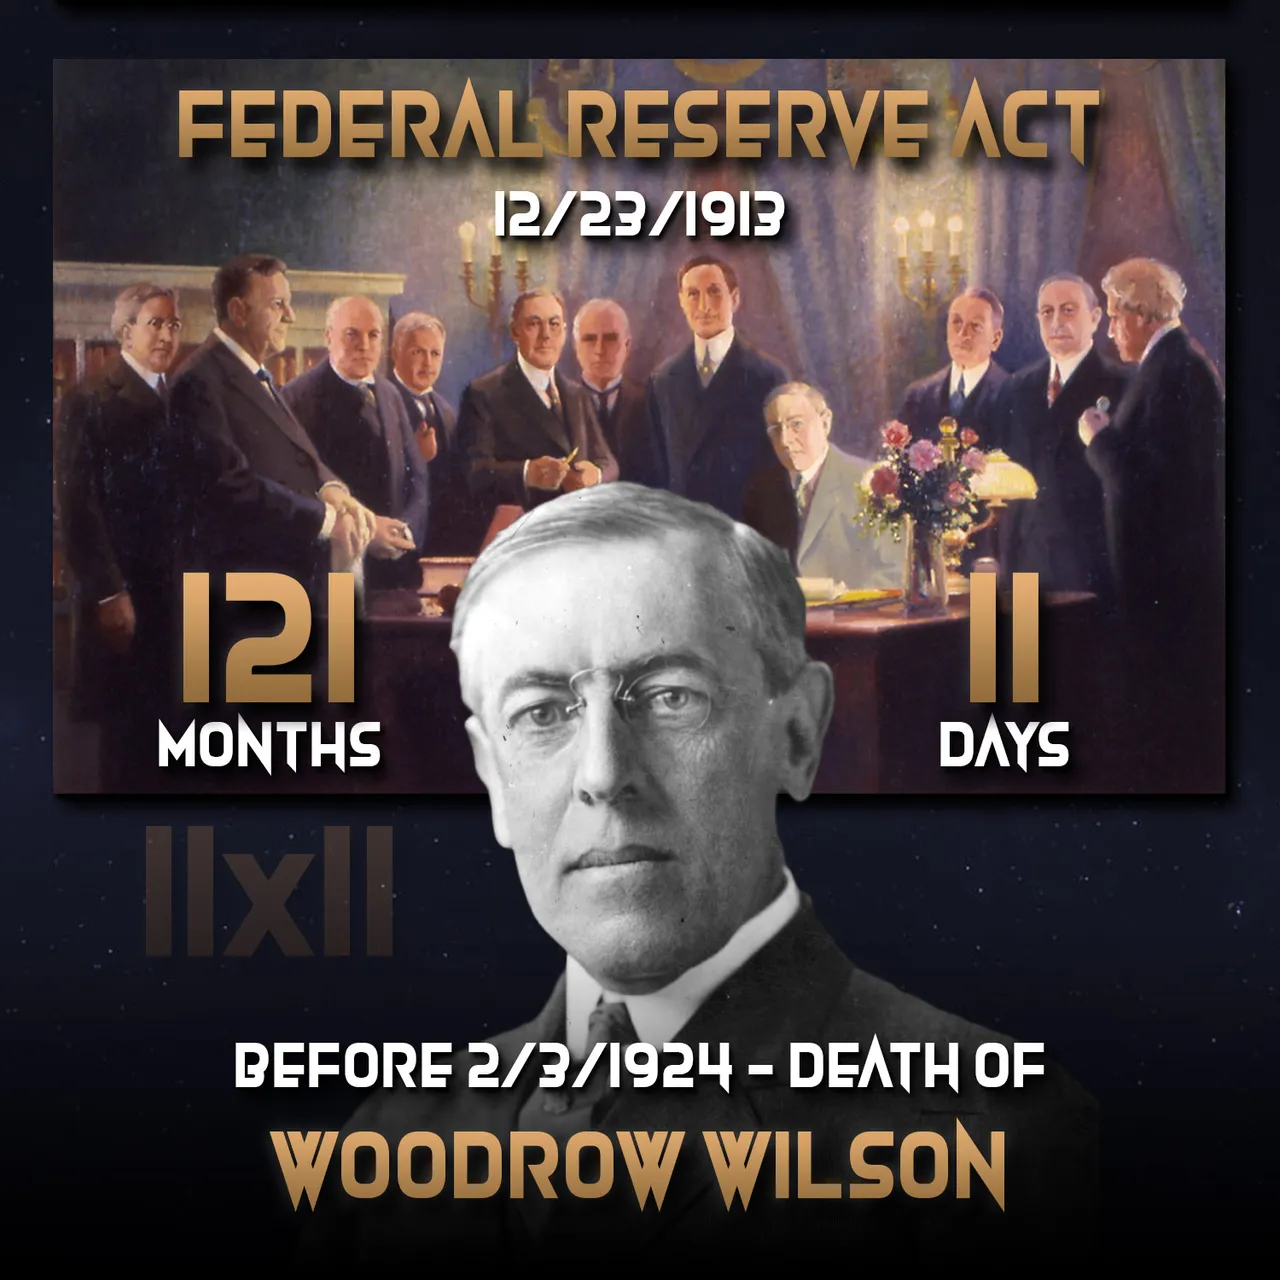 APX Federal Reserve Act Woodrow Wilson 121m 11d.jpg